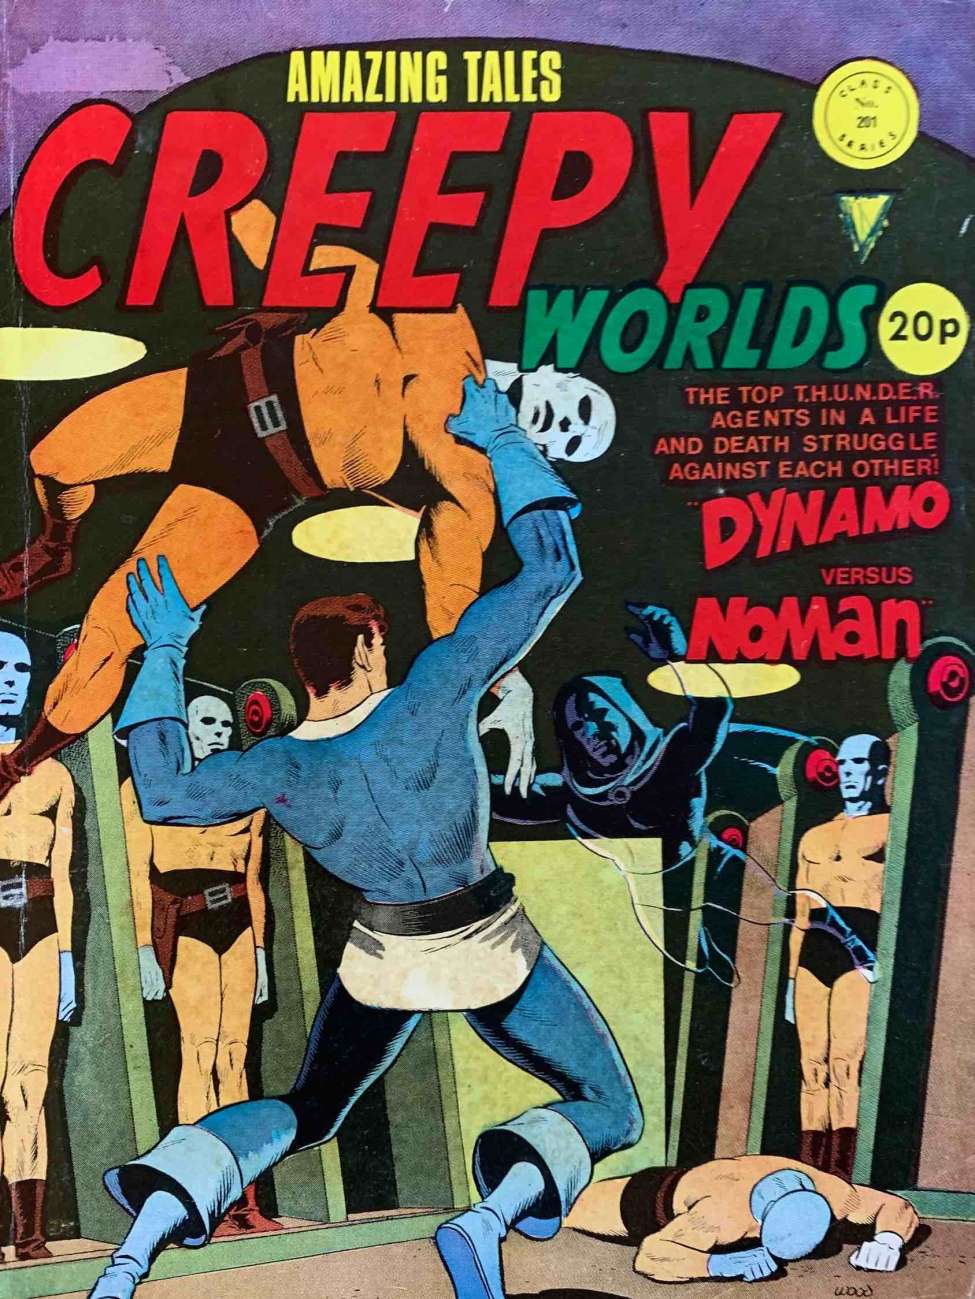 Book Cover For Creepy Worlds 201